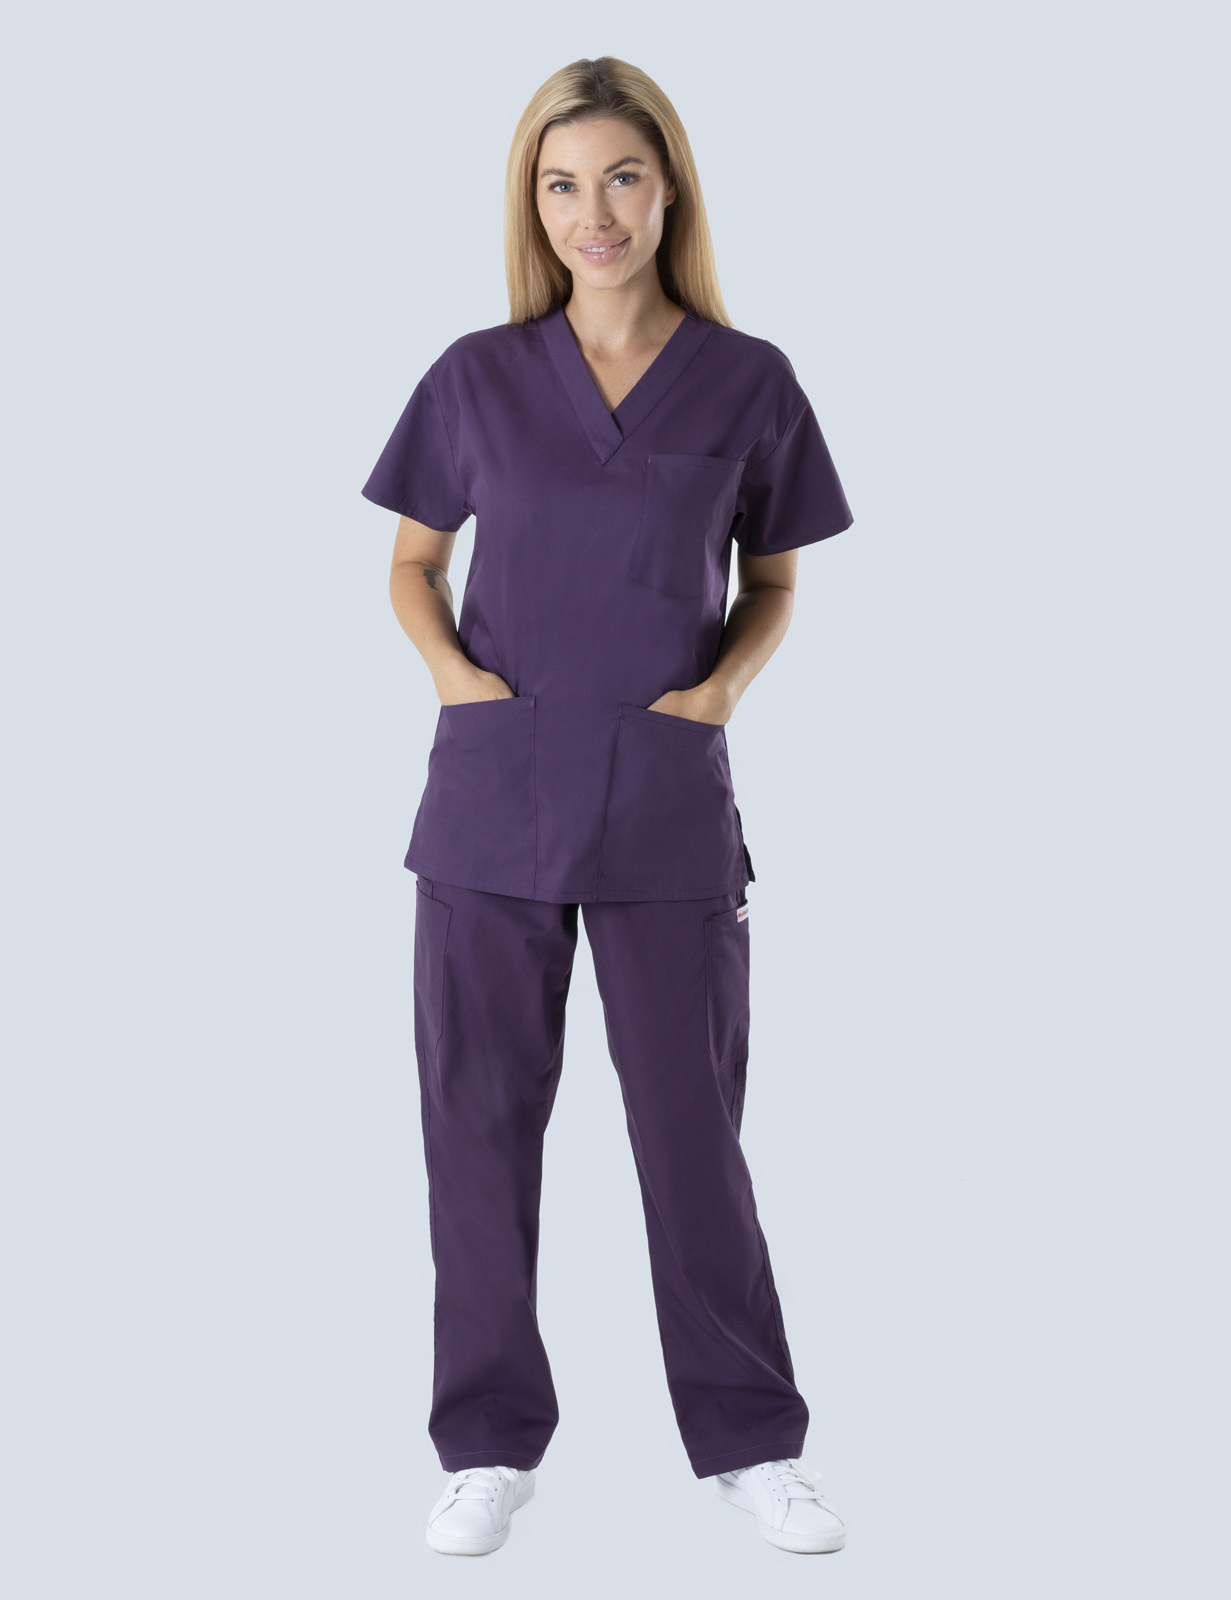 Gladstone Hospital - Hdurenal (4 Pocket Scrub Top and Cargo Pants in Aubergine incl Logos)